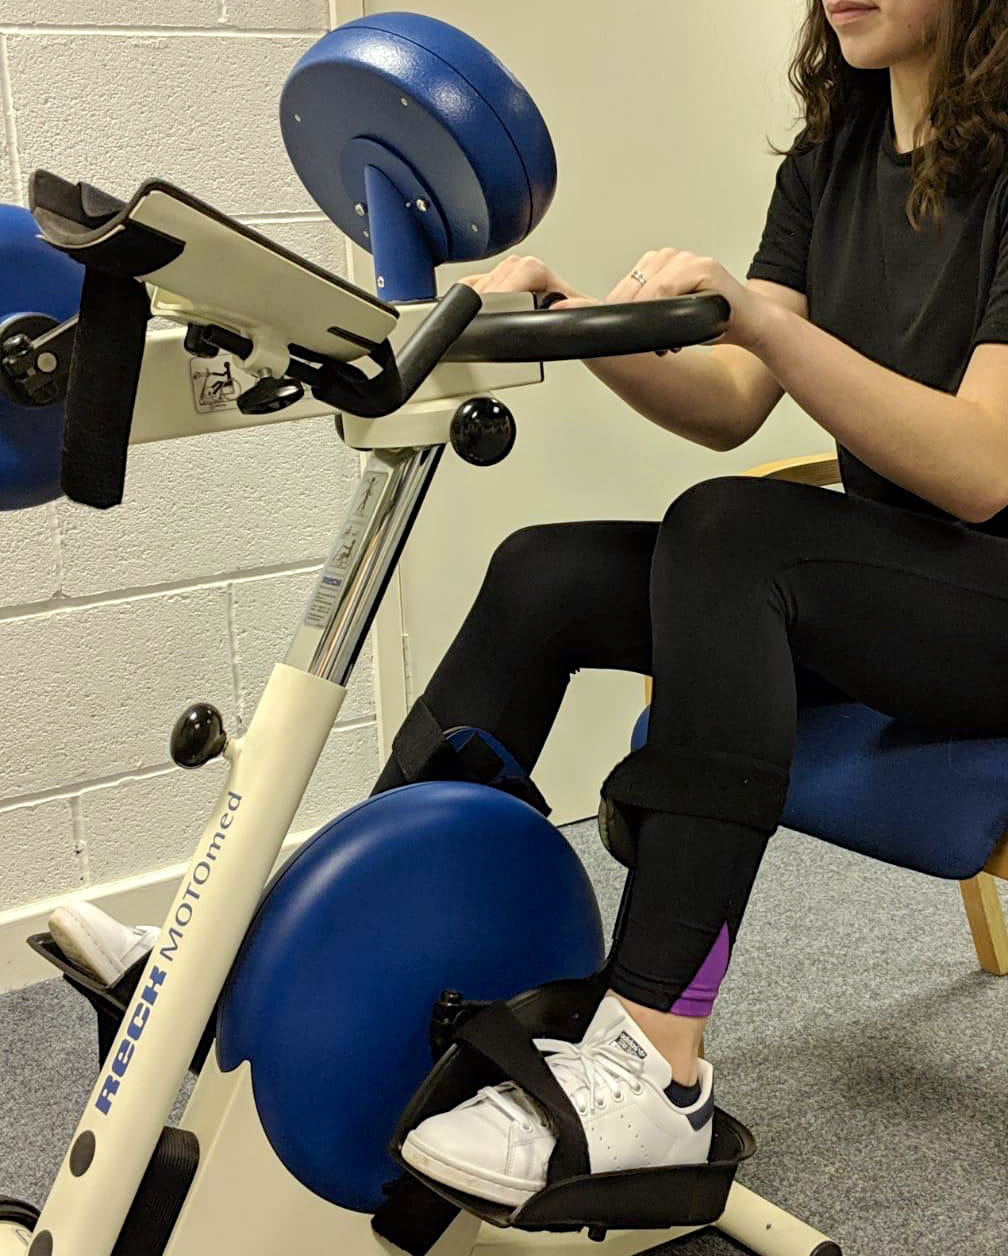 Patient on exercise bike